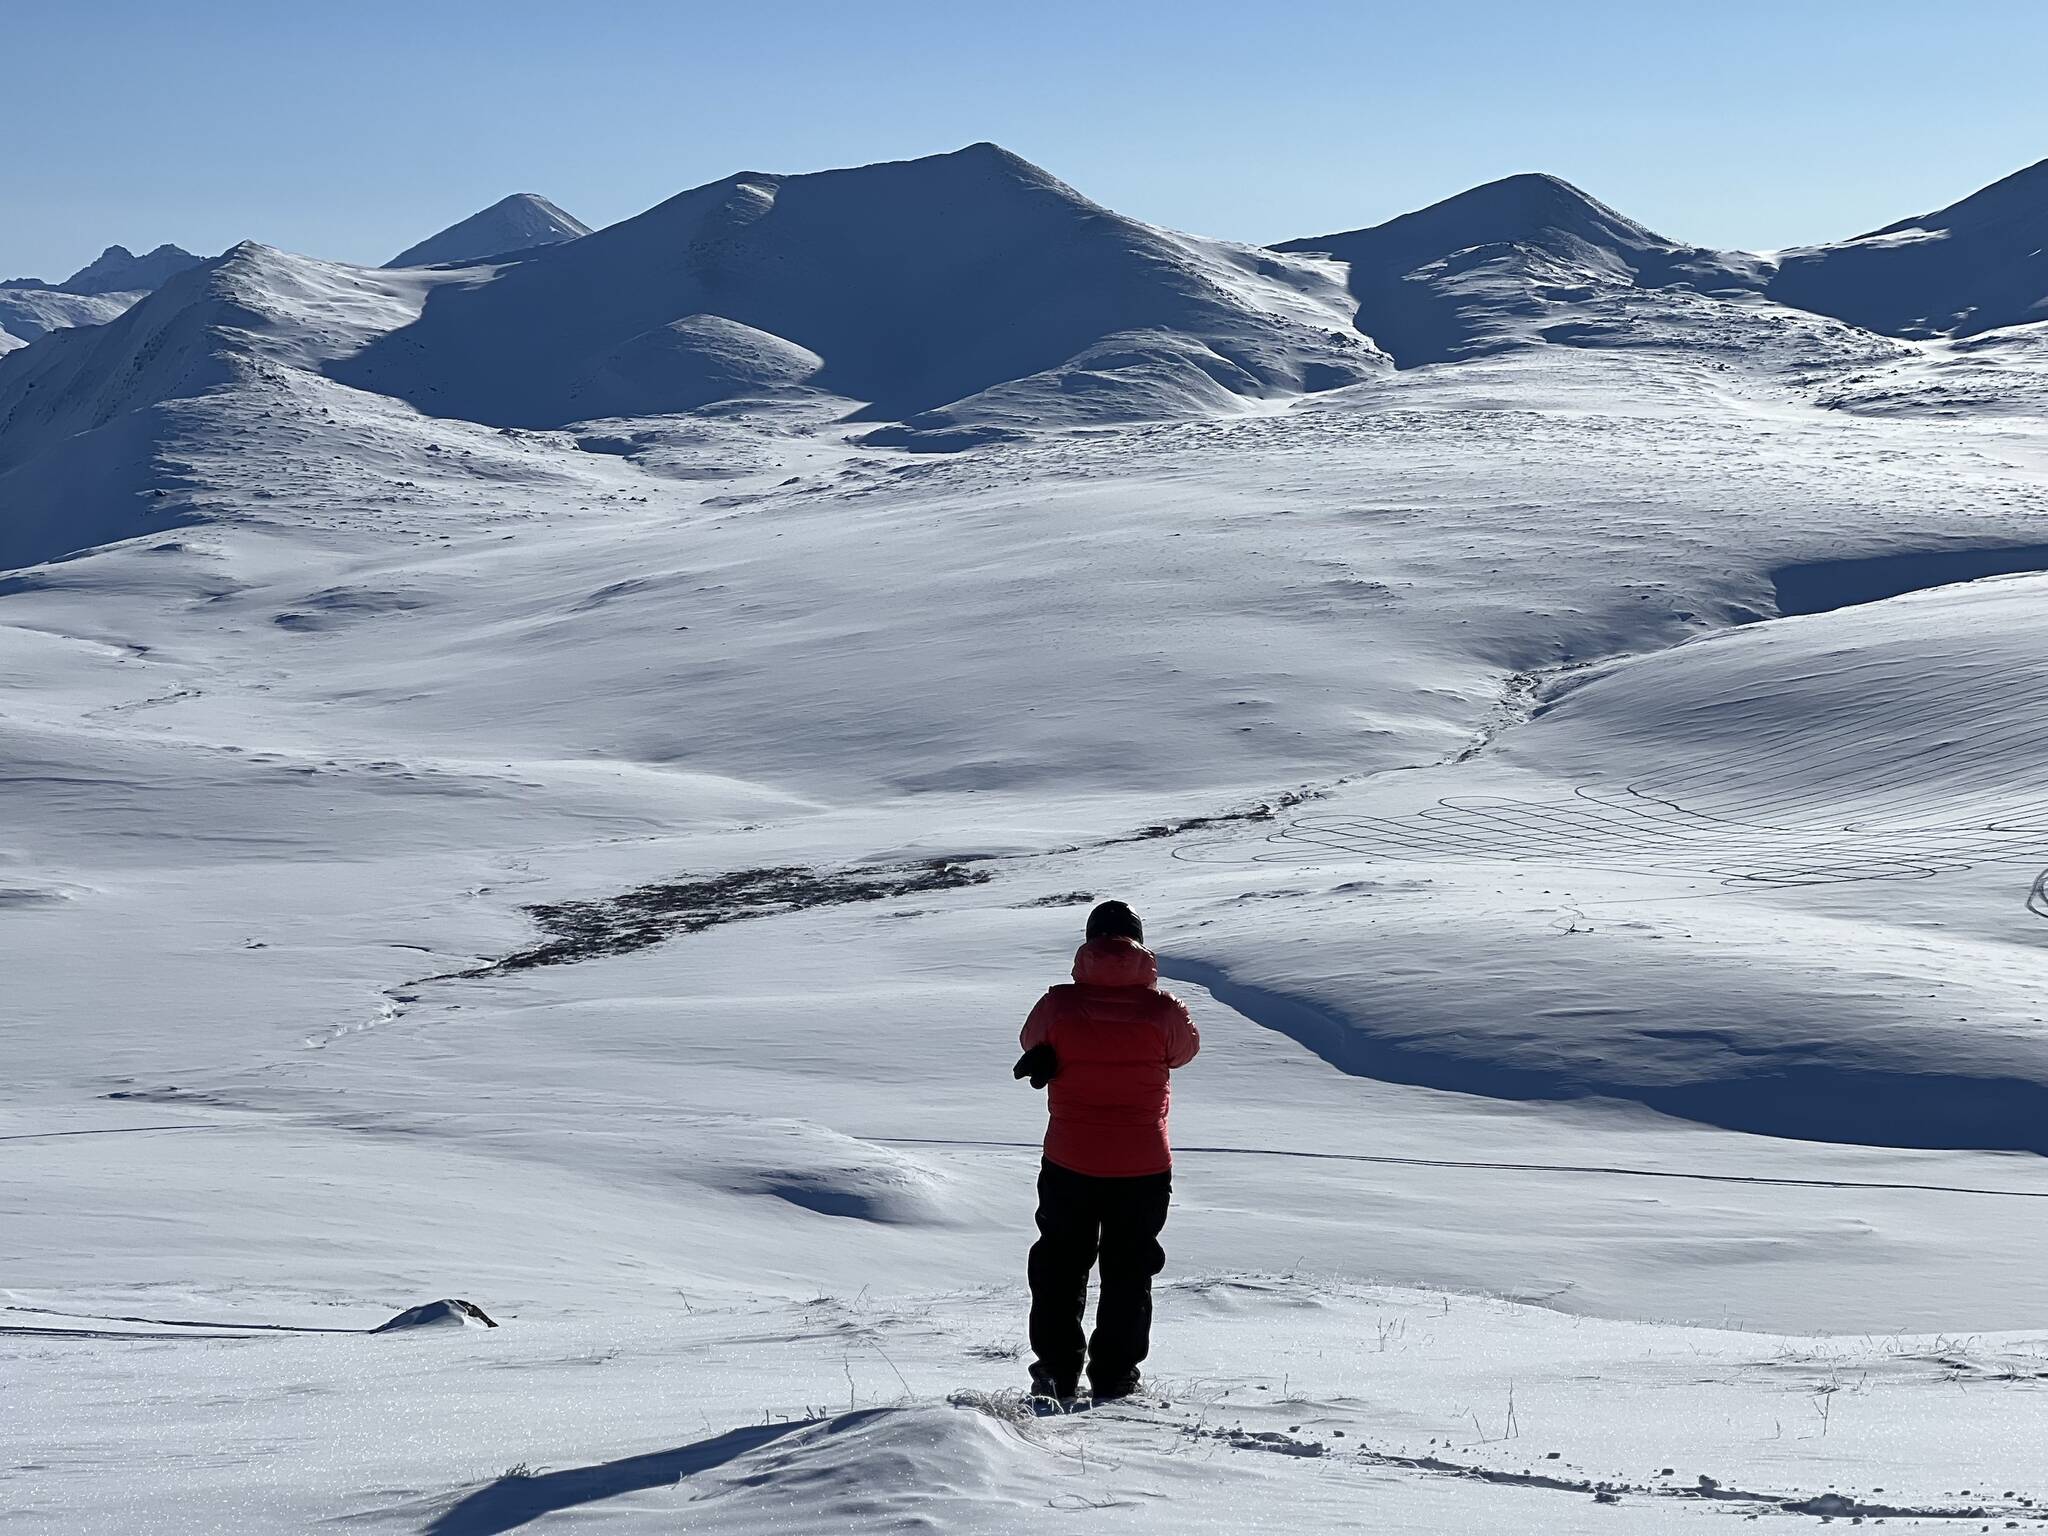 HP Marshall of Boise State University takes a photo of Alaska’s North Slope north of the Brooks Range during a snow survey as part of a NASA experiment. (Courtesy Photo / Sveta Stuefer)